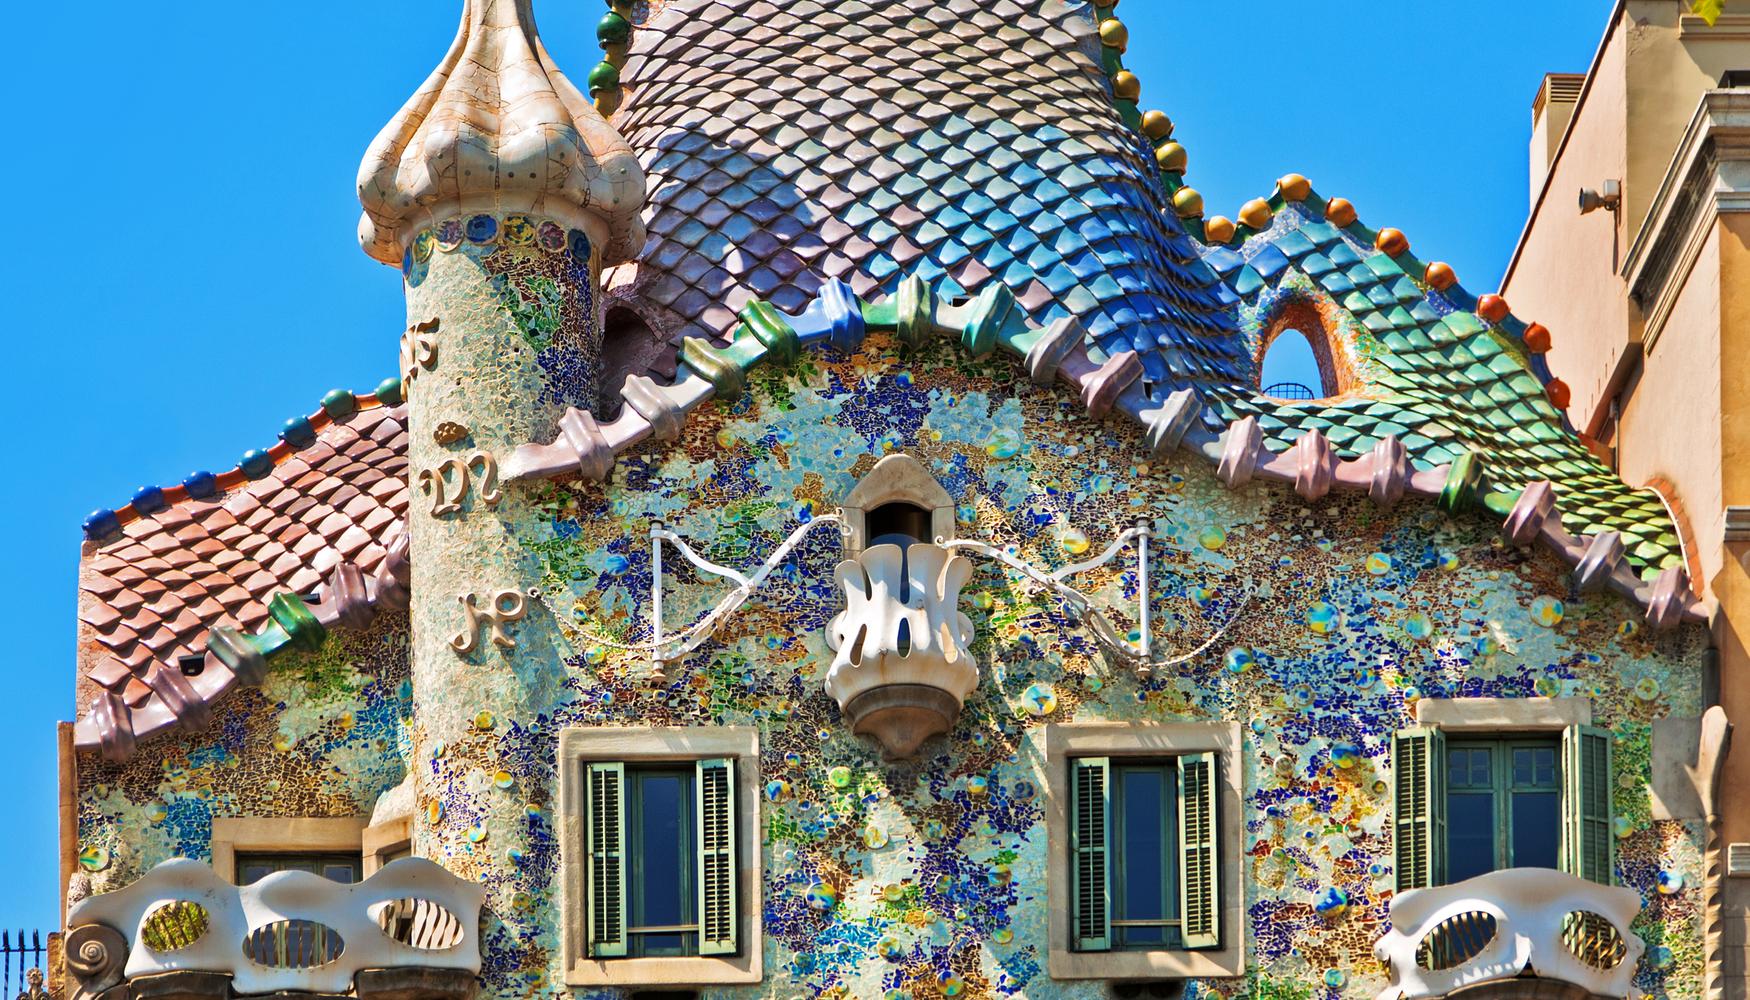 Barcelona Vacation Packages from 747 Search Flight+Hotel on KAYAK